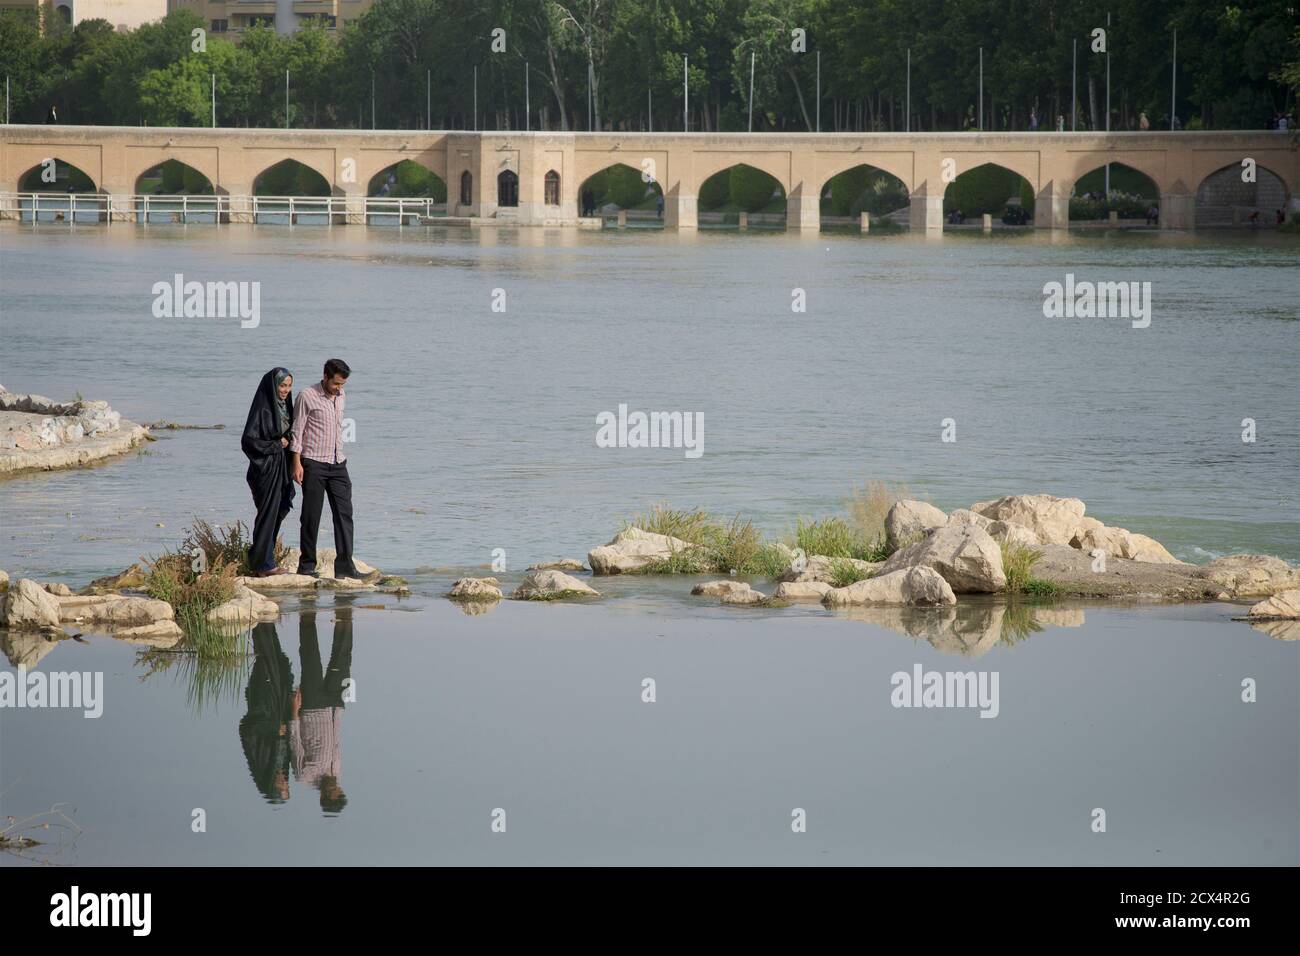 Iranian couple crossing stepping stones on the river Zayandeh, Isfahan, Iran Stock Photo